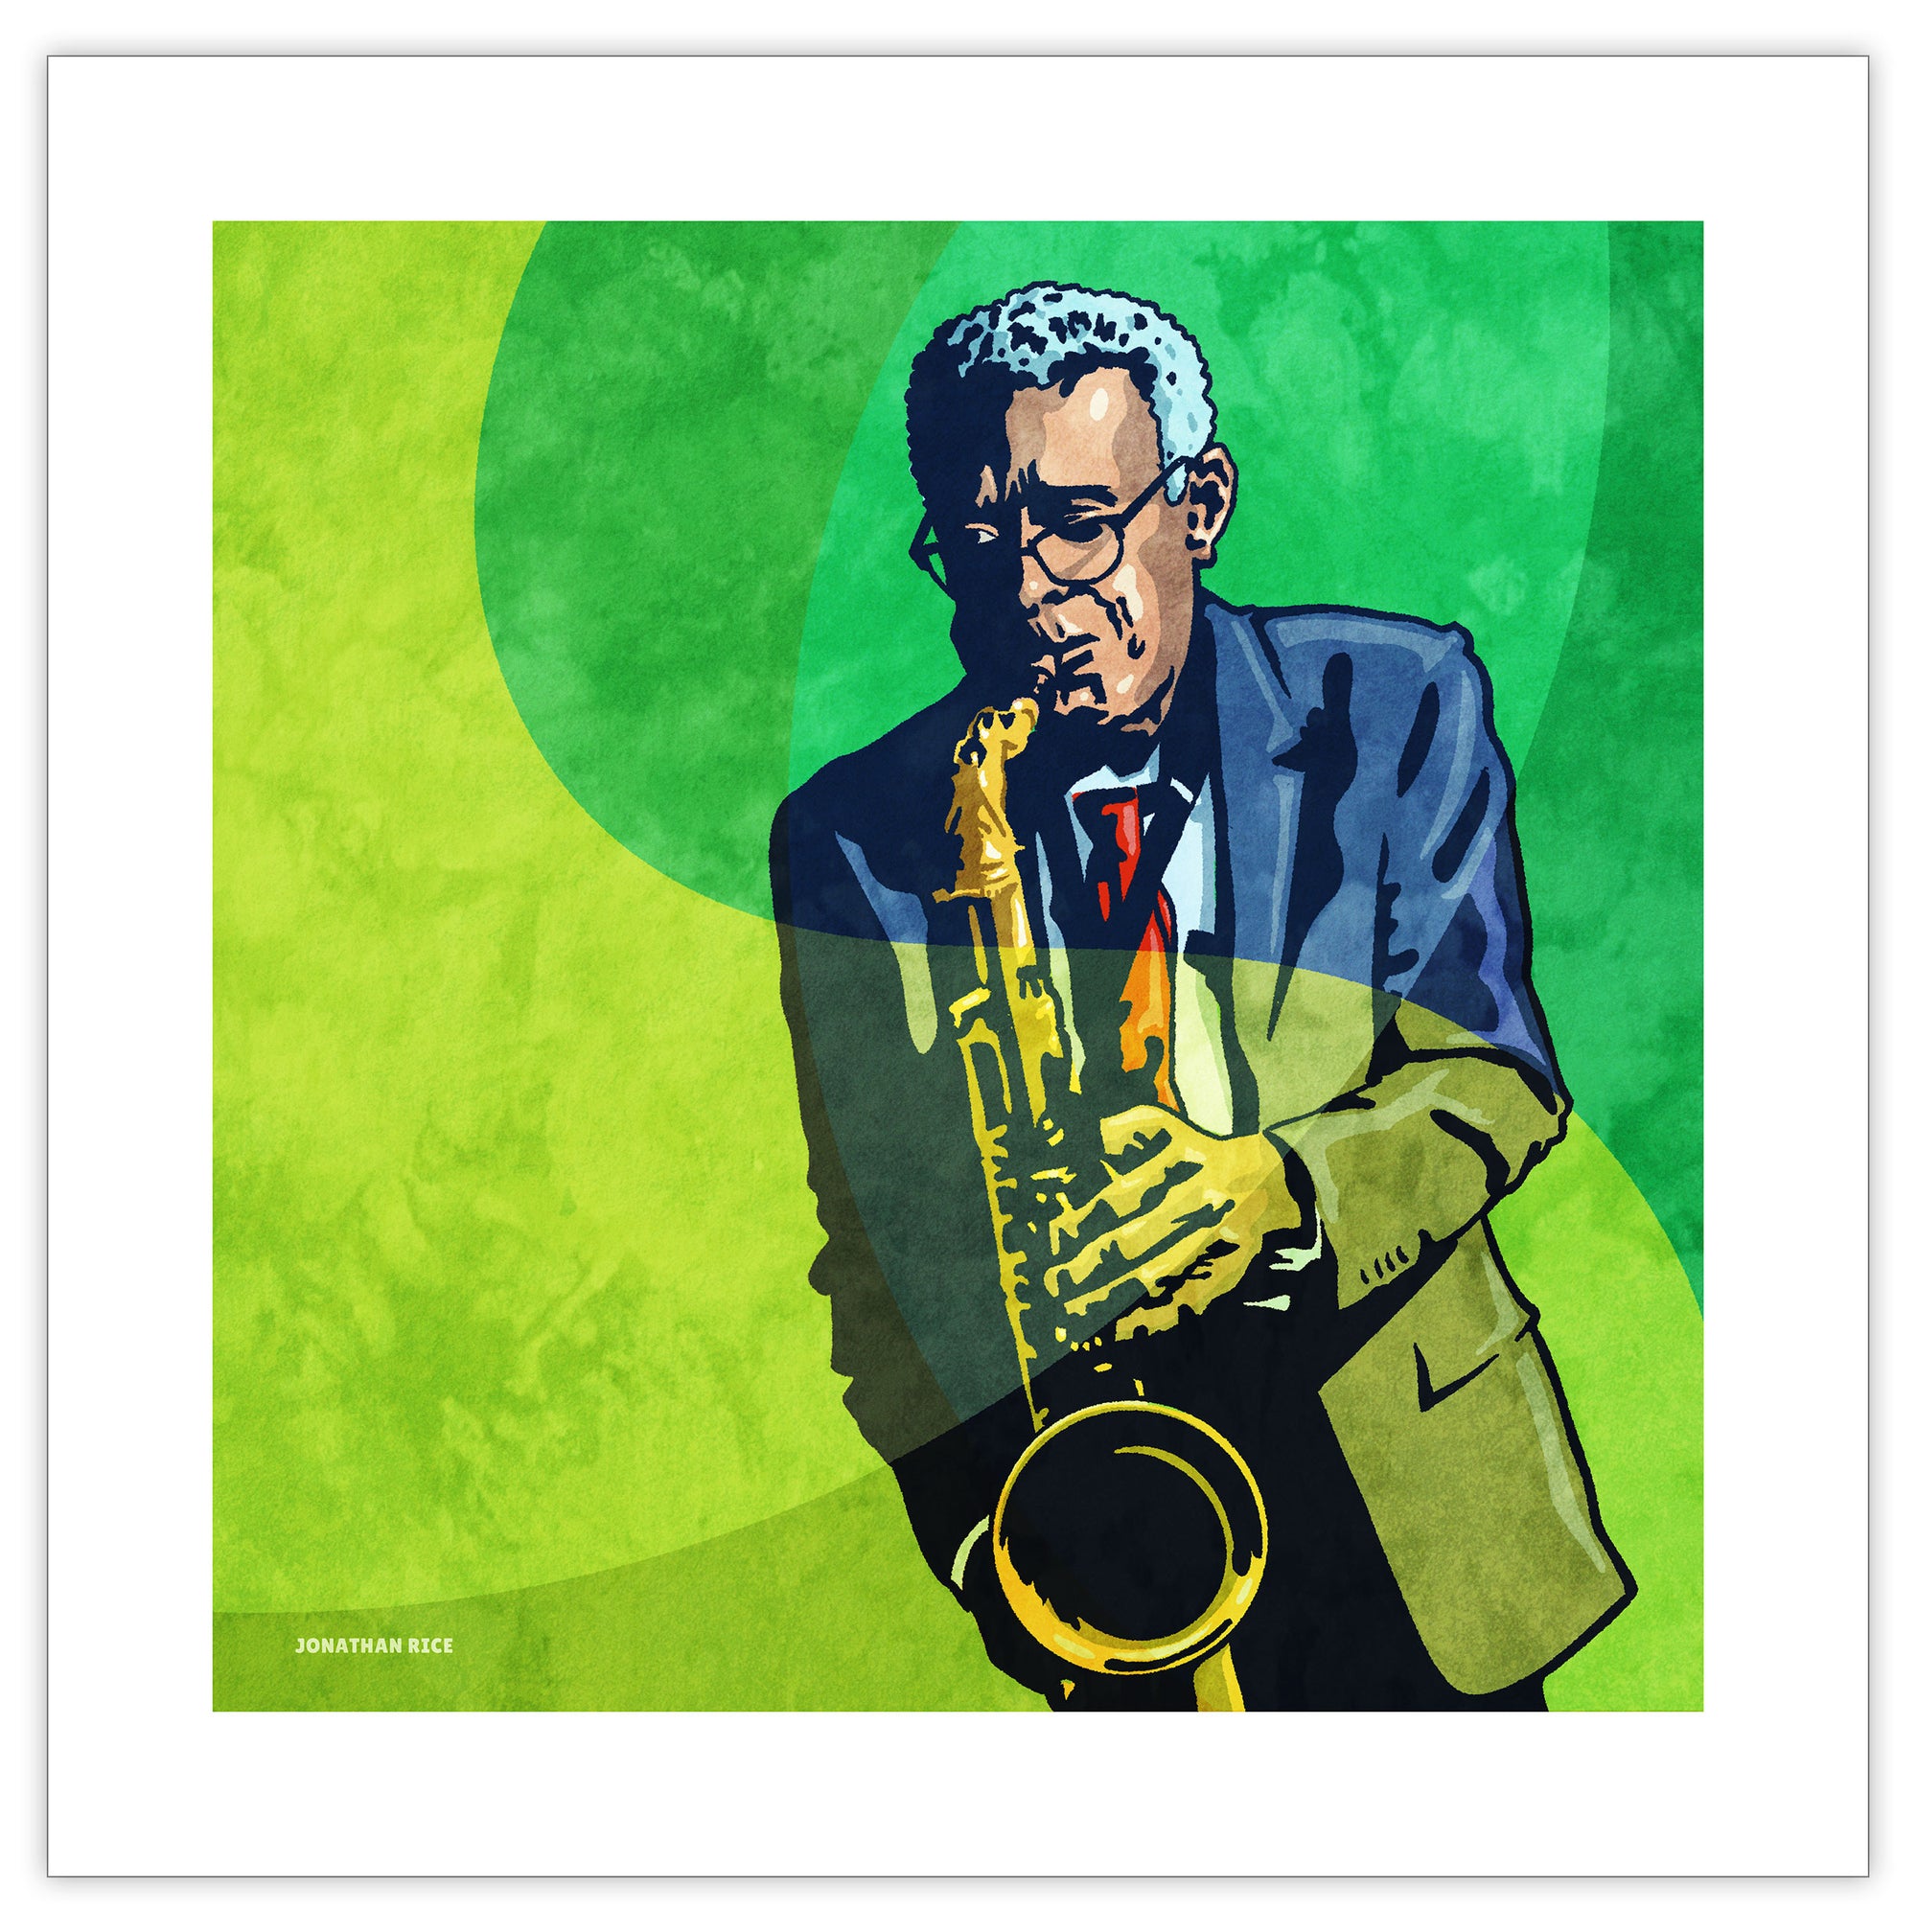 An upbeat and colorful print of cool New Orleans Jazz Saxophonist Charlie Gabriel. Bold graphic lines and bright colorful shapes create an energetic portrait of the black musician. 